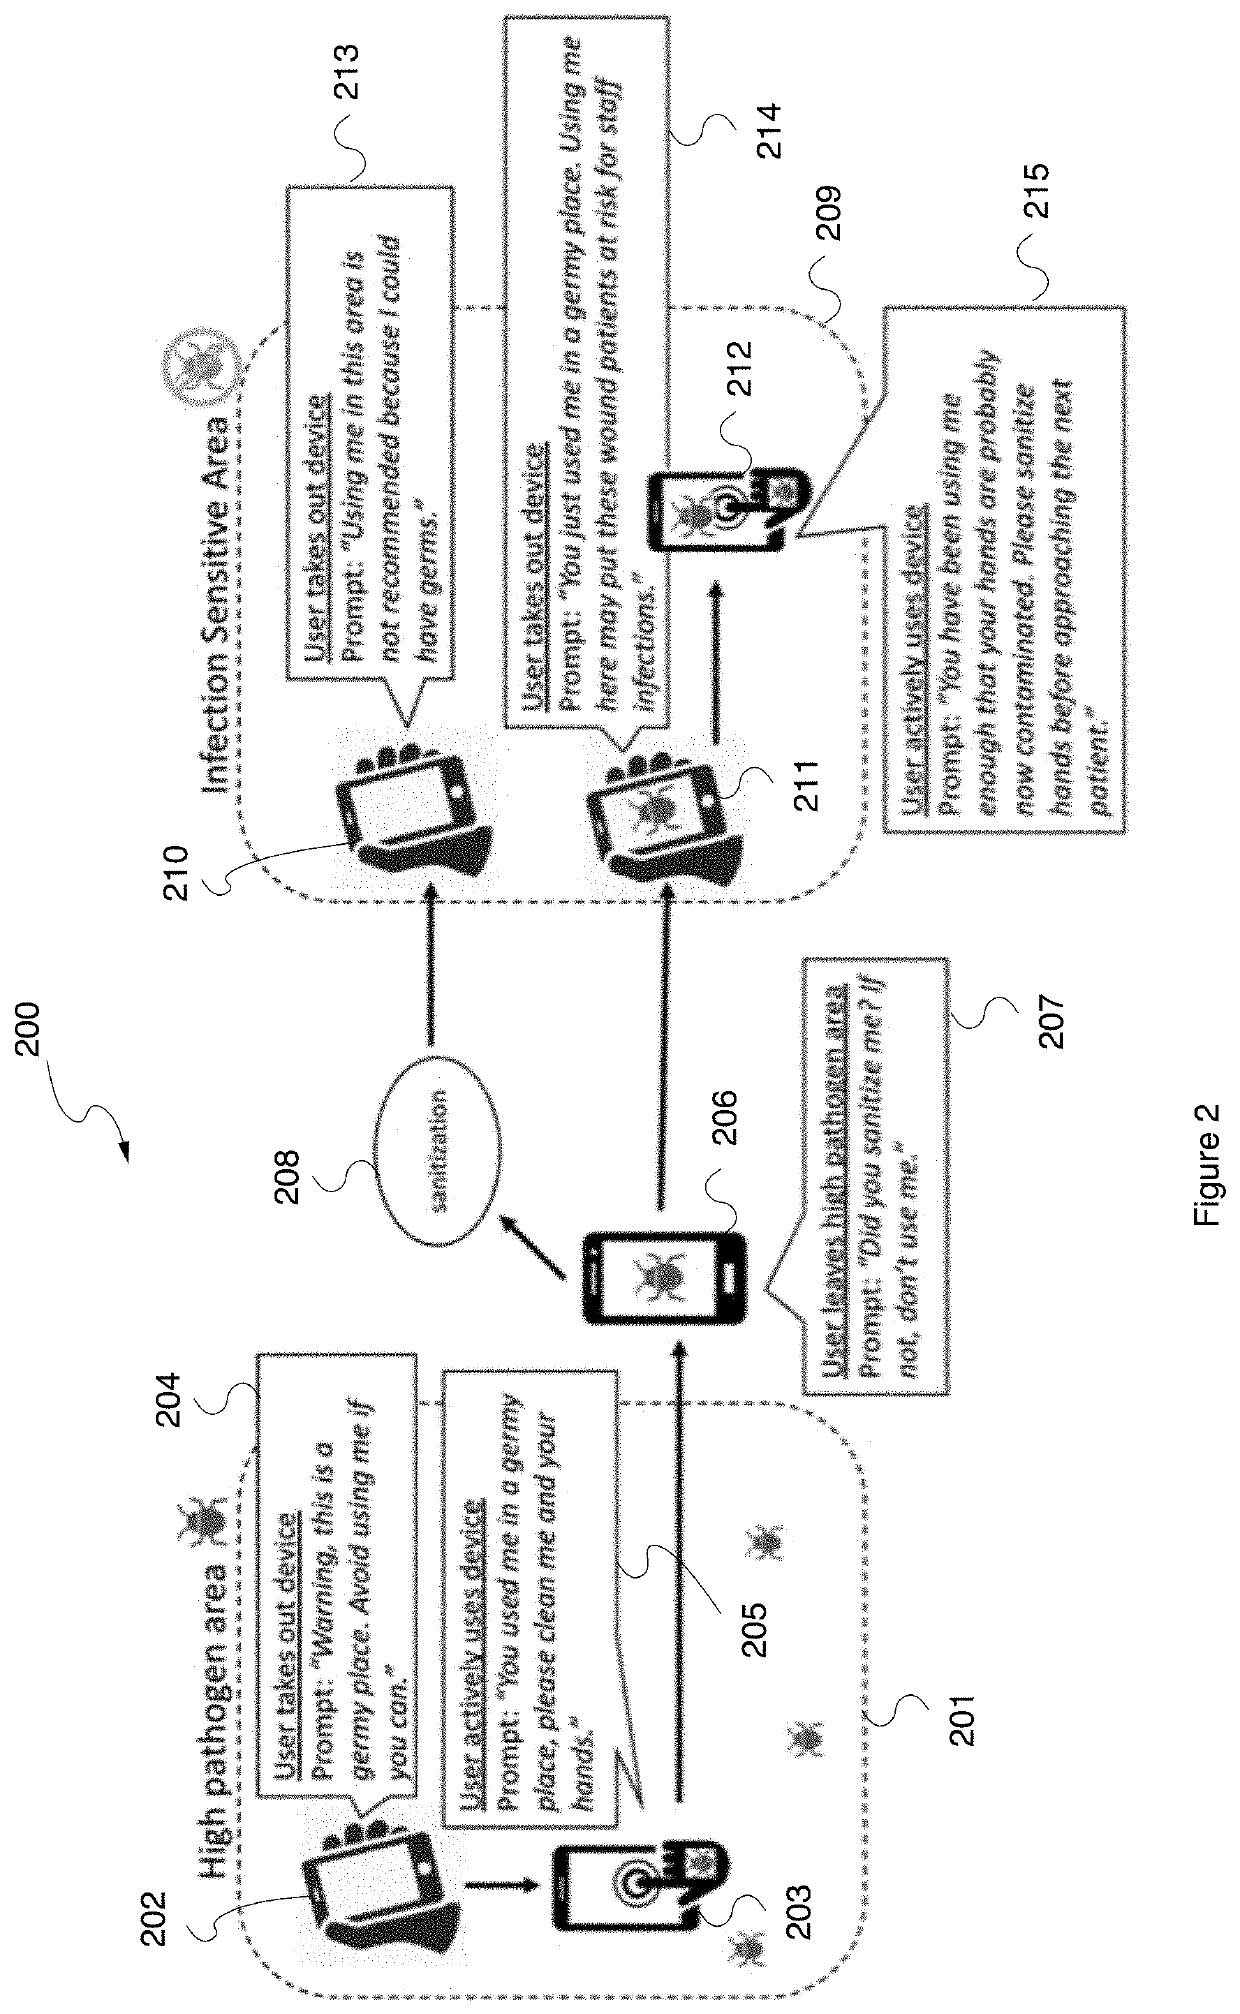 System and method for estimating pathogen transfer from mobile interaction in clinical environments and a warning system and method for reducing cross-contamination risks